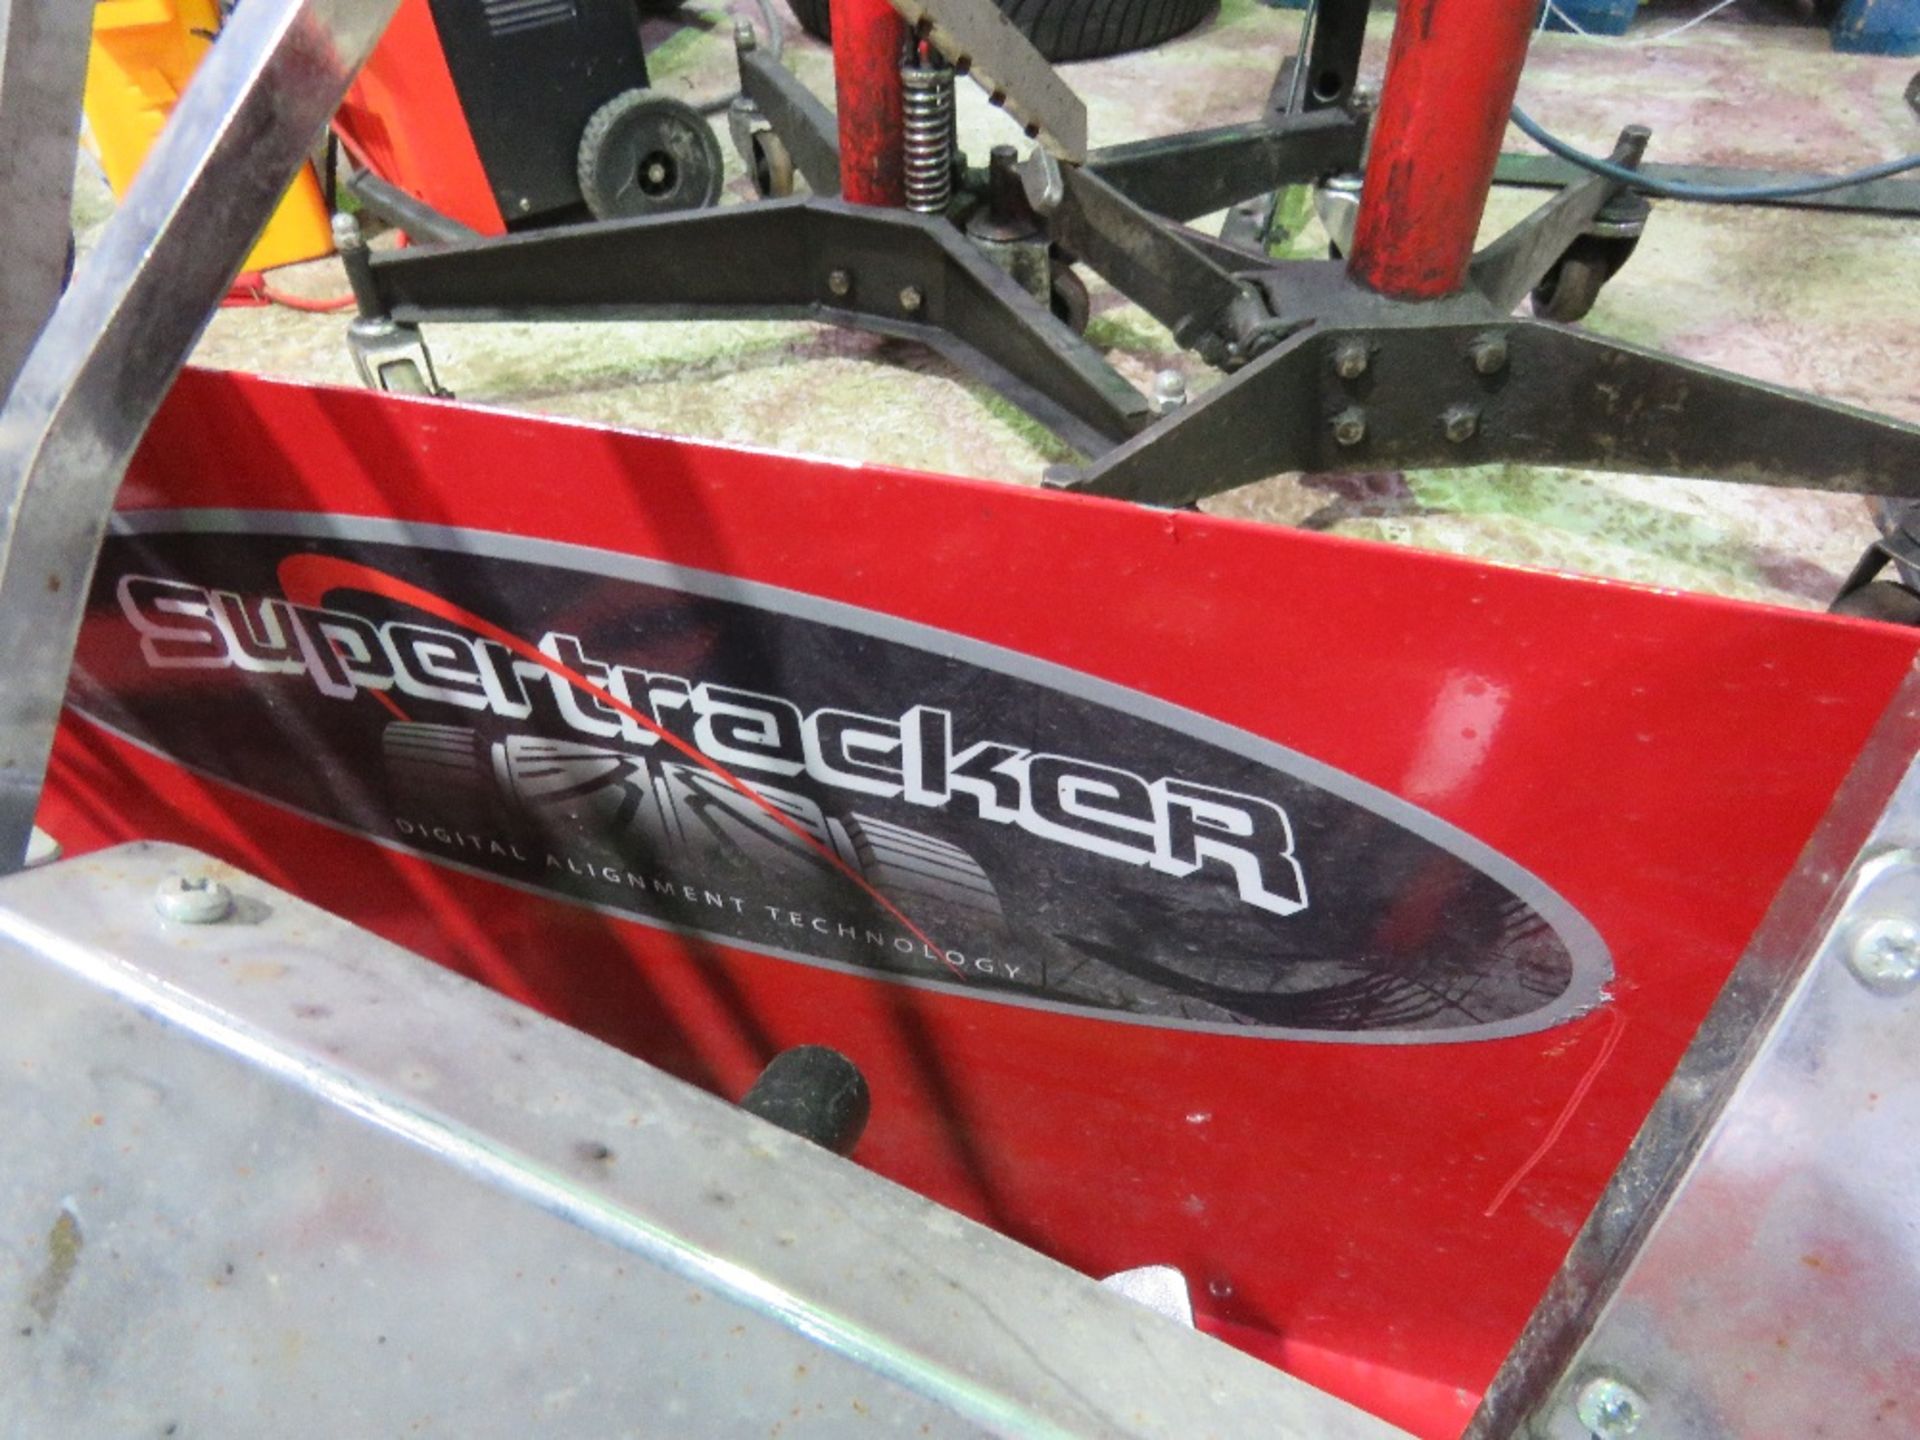 SUPERTRACKER WHEEL ALIGNMENT SET WITH SWIVEL PLATES ETC. SOURCED FROM GARAGE COMPANY LIQUIDATION. - Image 5 of 8